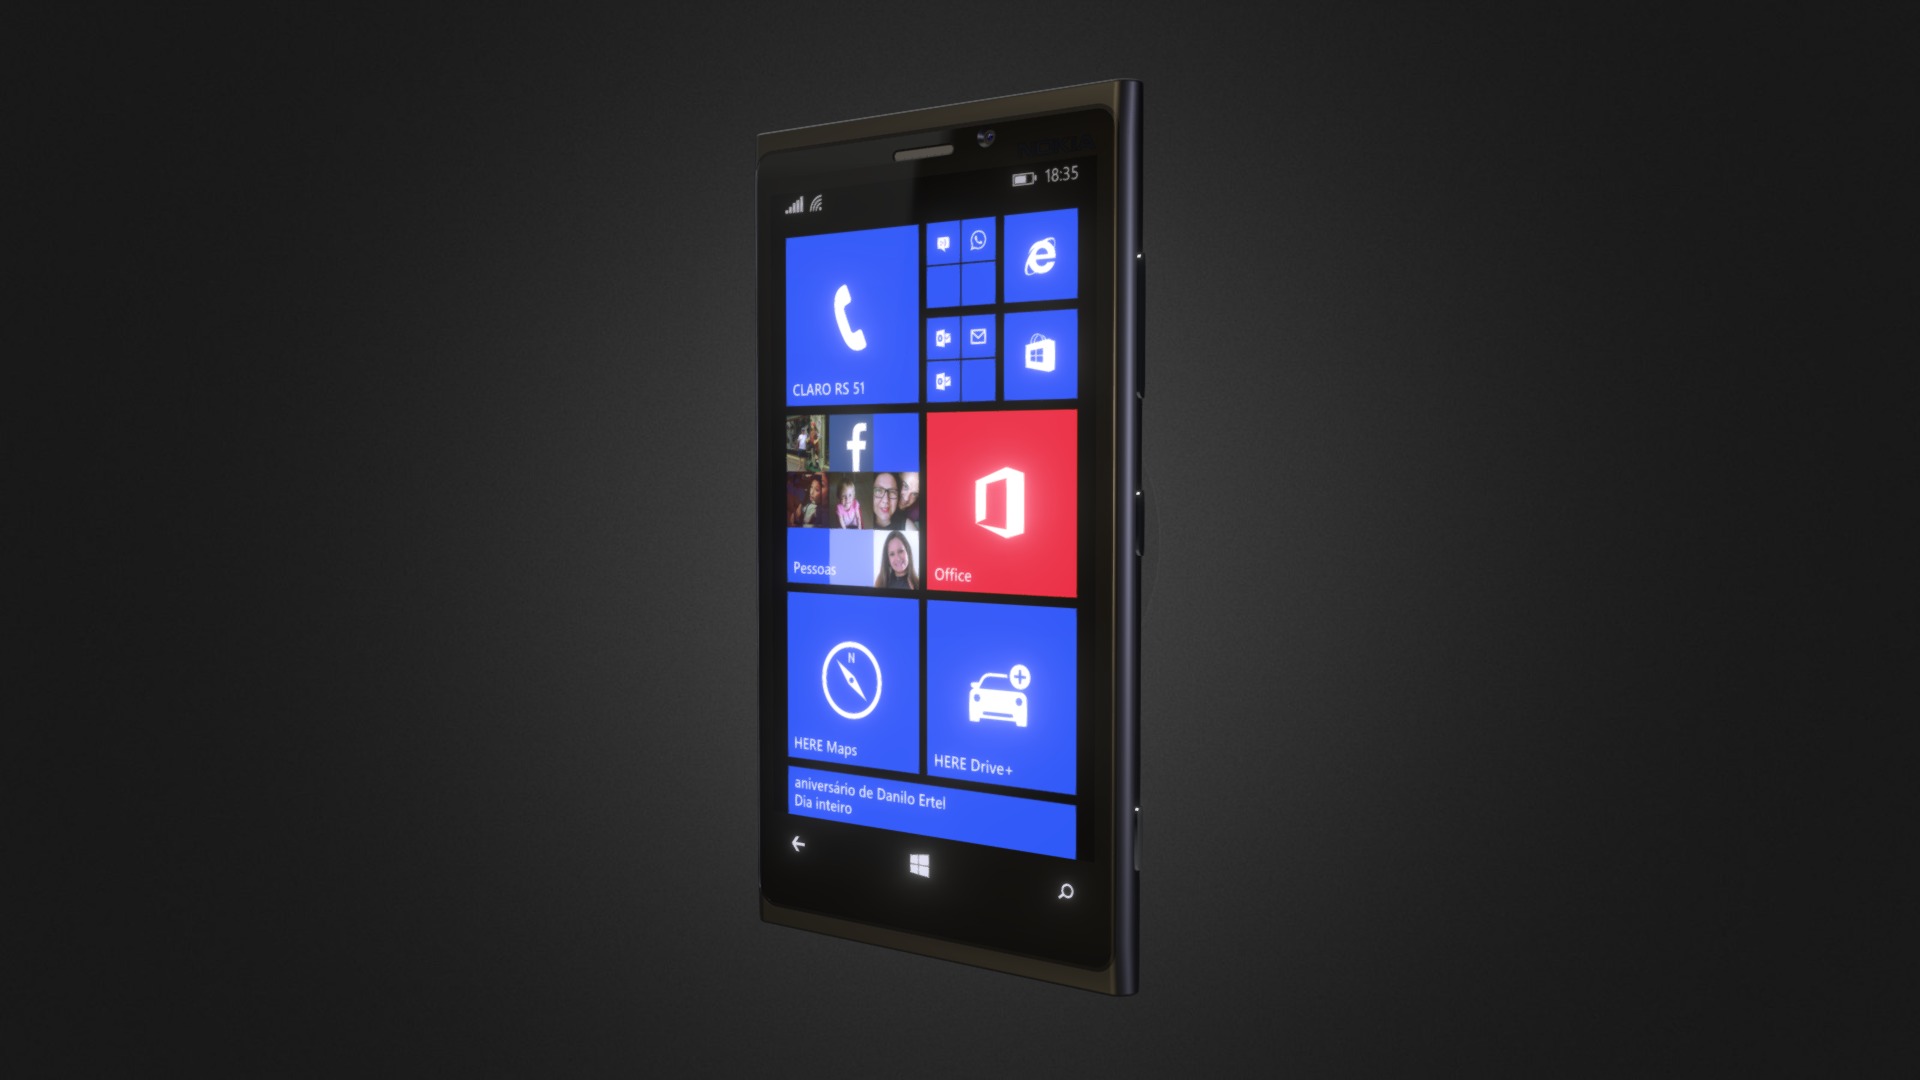 3D model Nokia Lumia 920 - This is a 3D model of the Nokia Lumia 920. The 3D model is about a black smartphone with a blue screen.